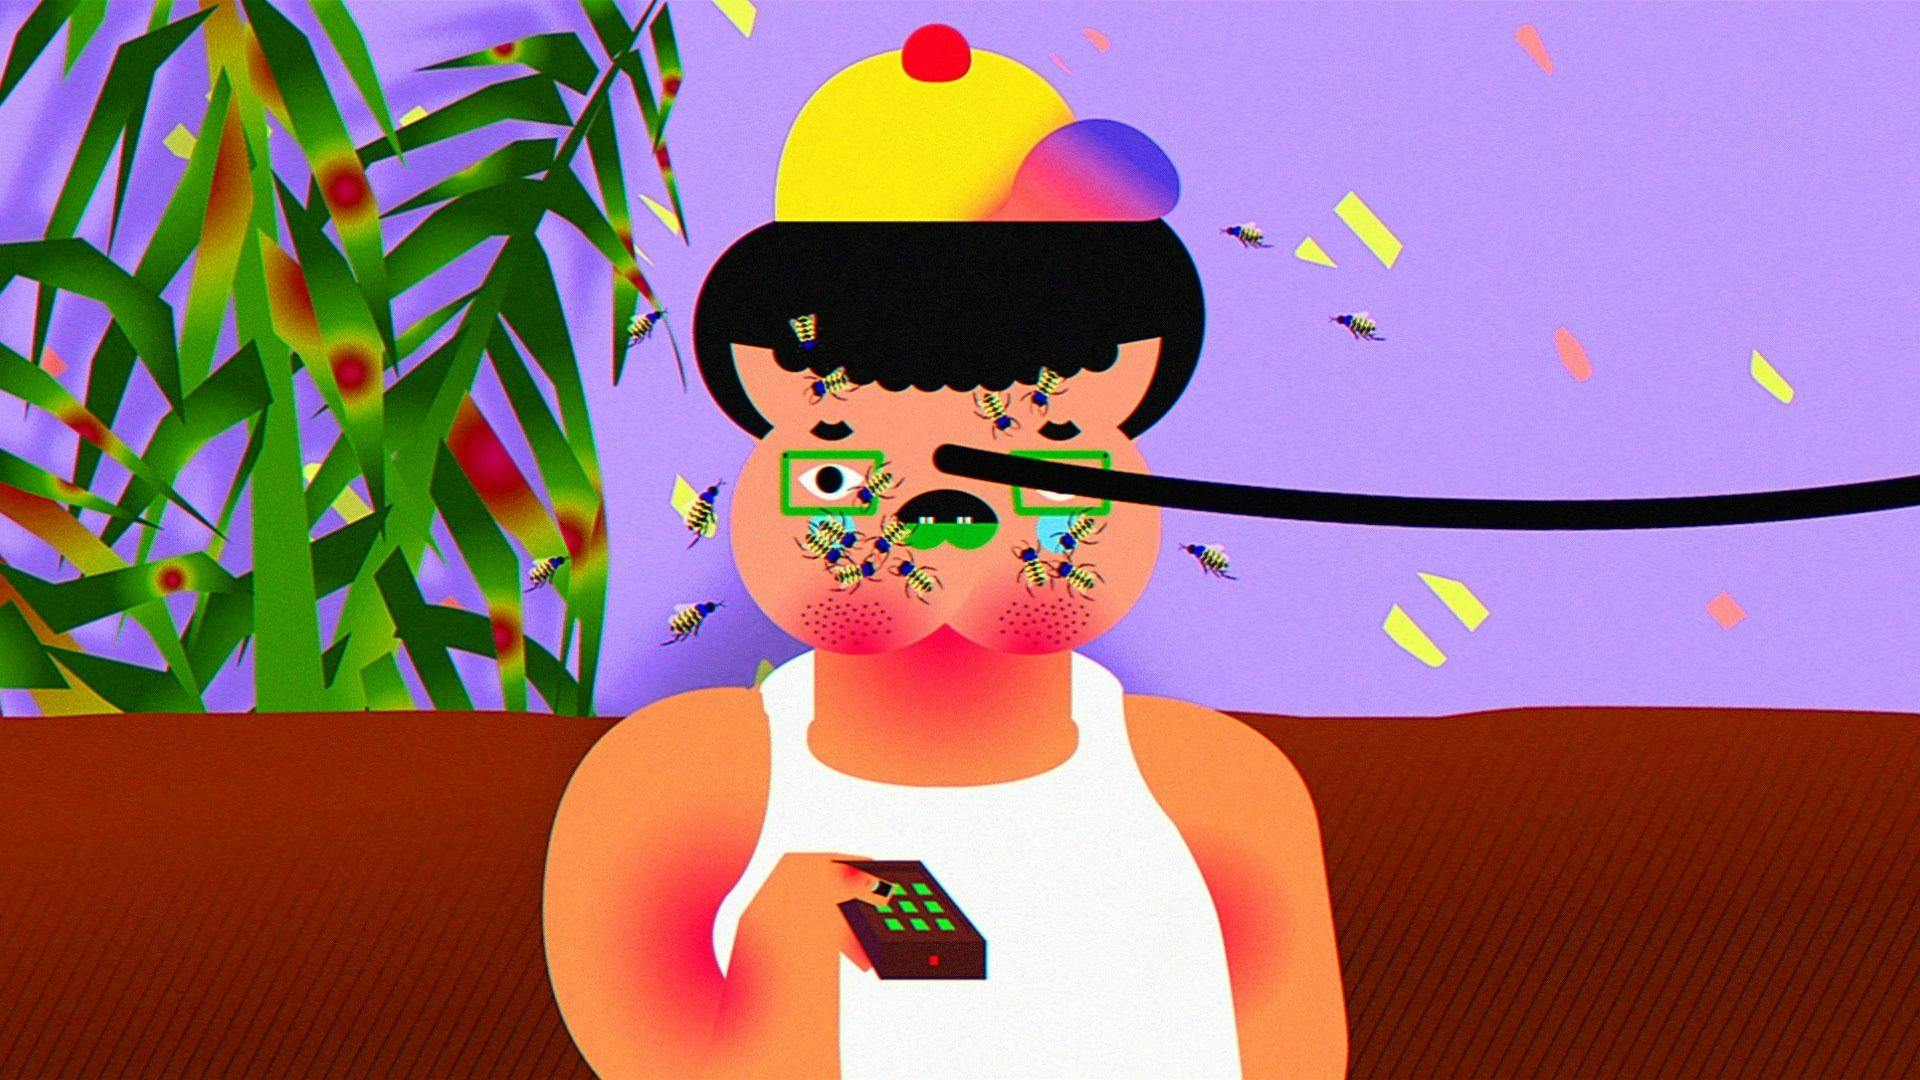 Computer-generated, cartoon-like image of someone sat on a sofa with a TV remote in their hand. Their face has lots of insects landed on it and there is a plant in the background.